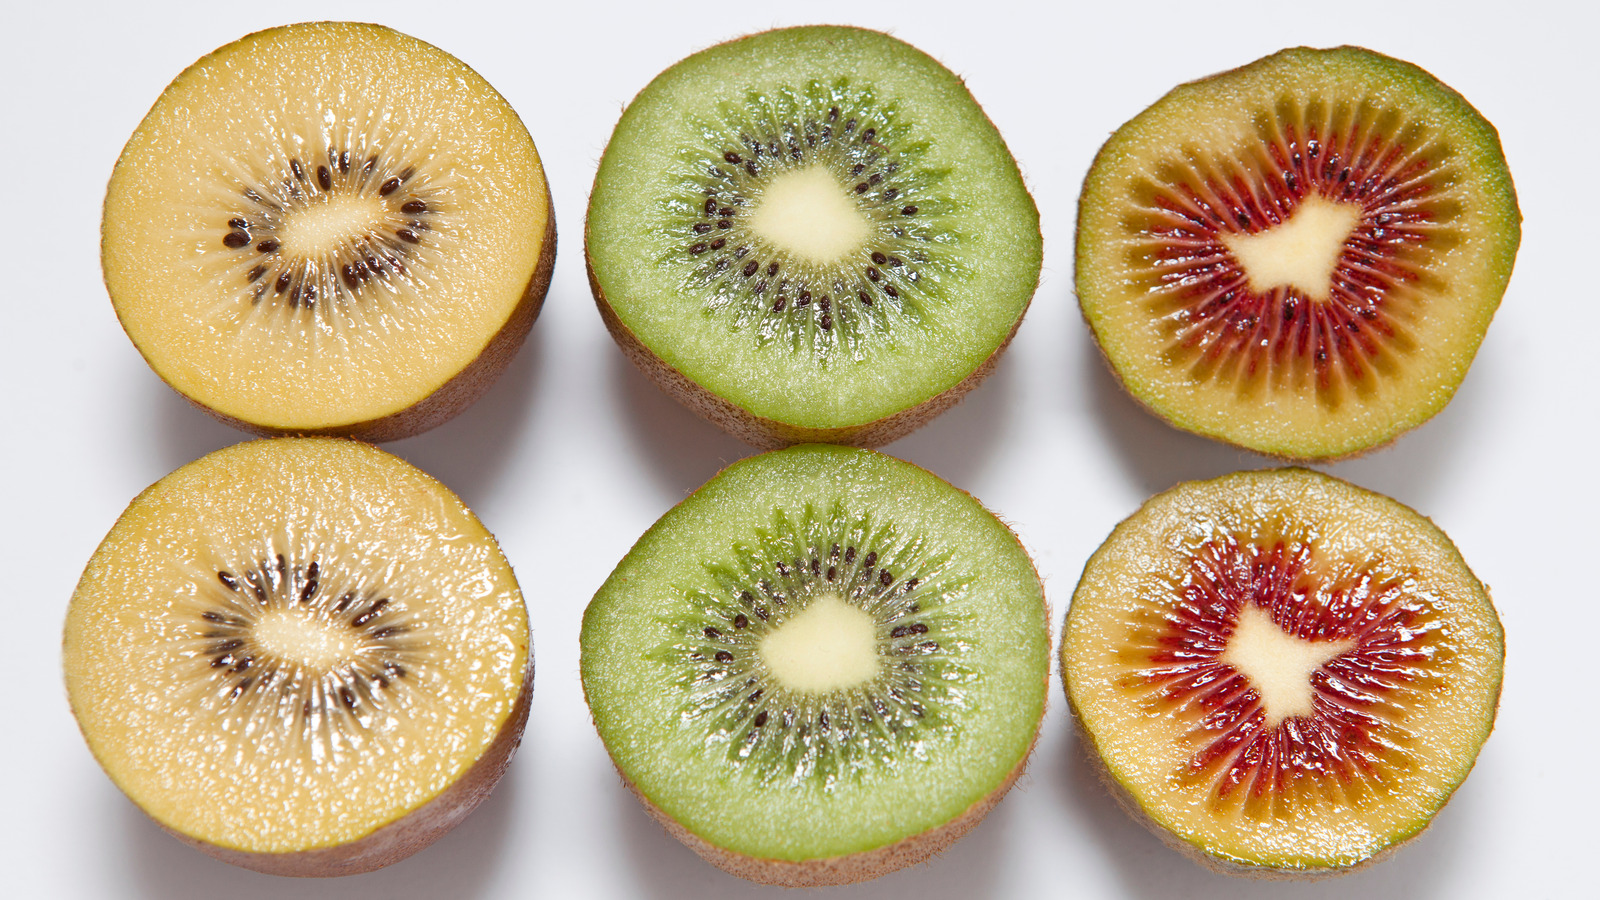 https://www.tastingtable.com/img/gallery/most-of-the-worlds-kiwi-come-from-this-country/l-intro-1666303251.jpg